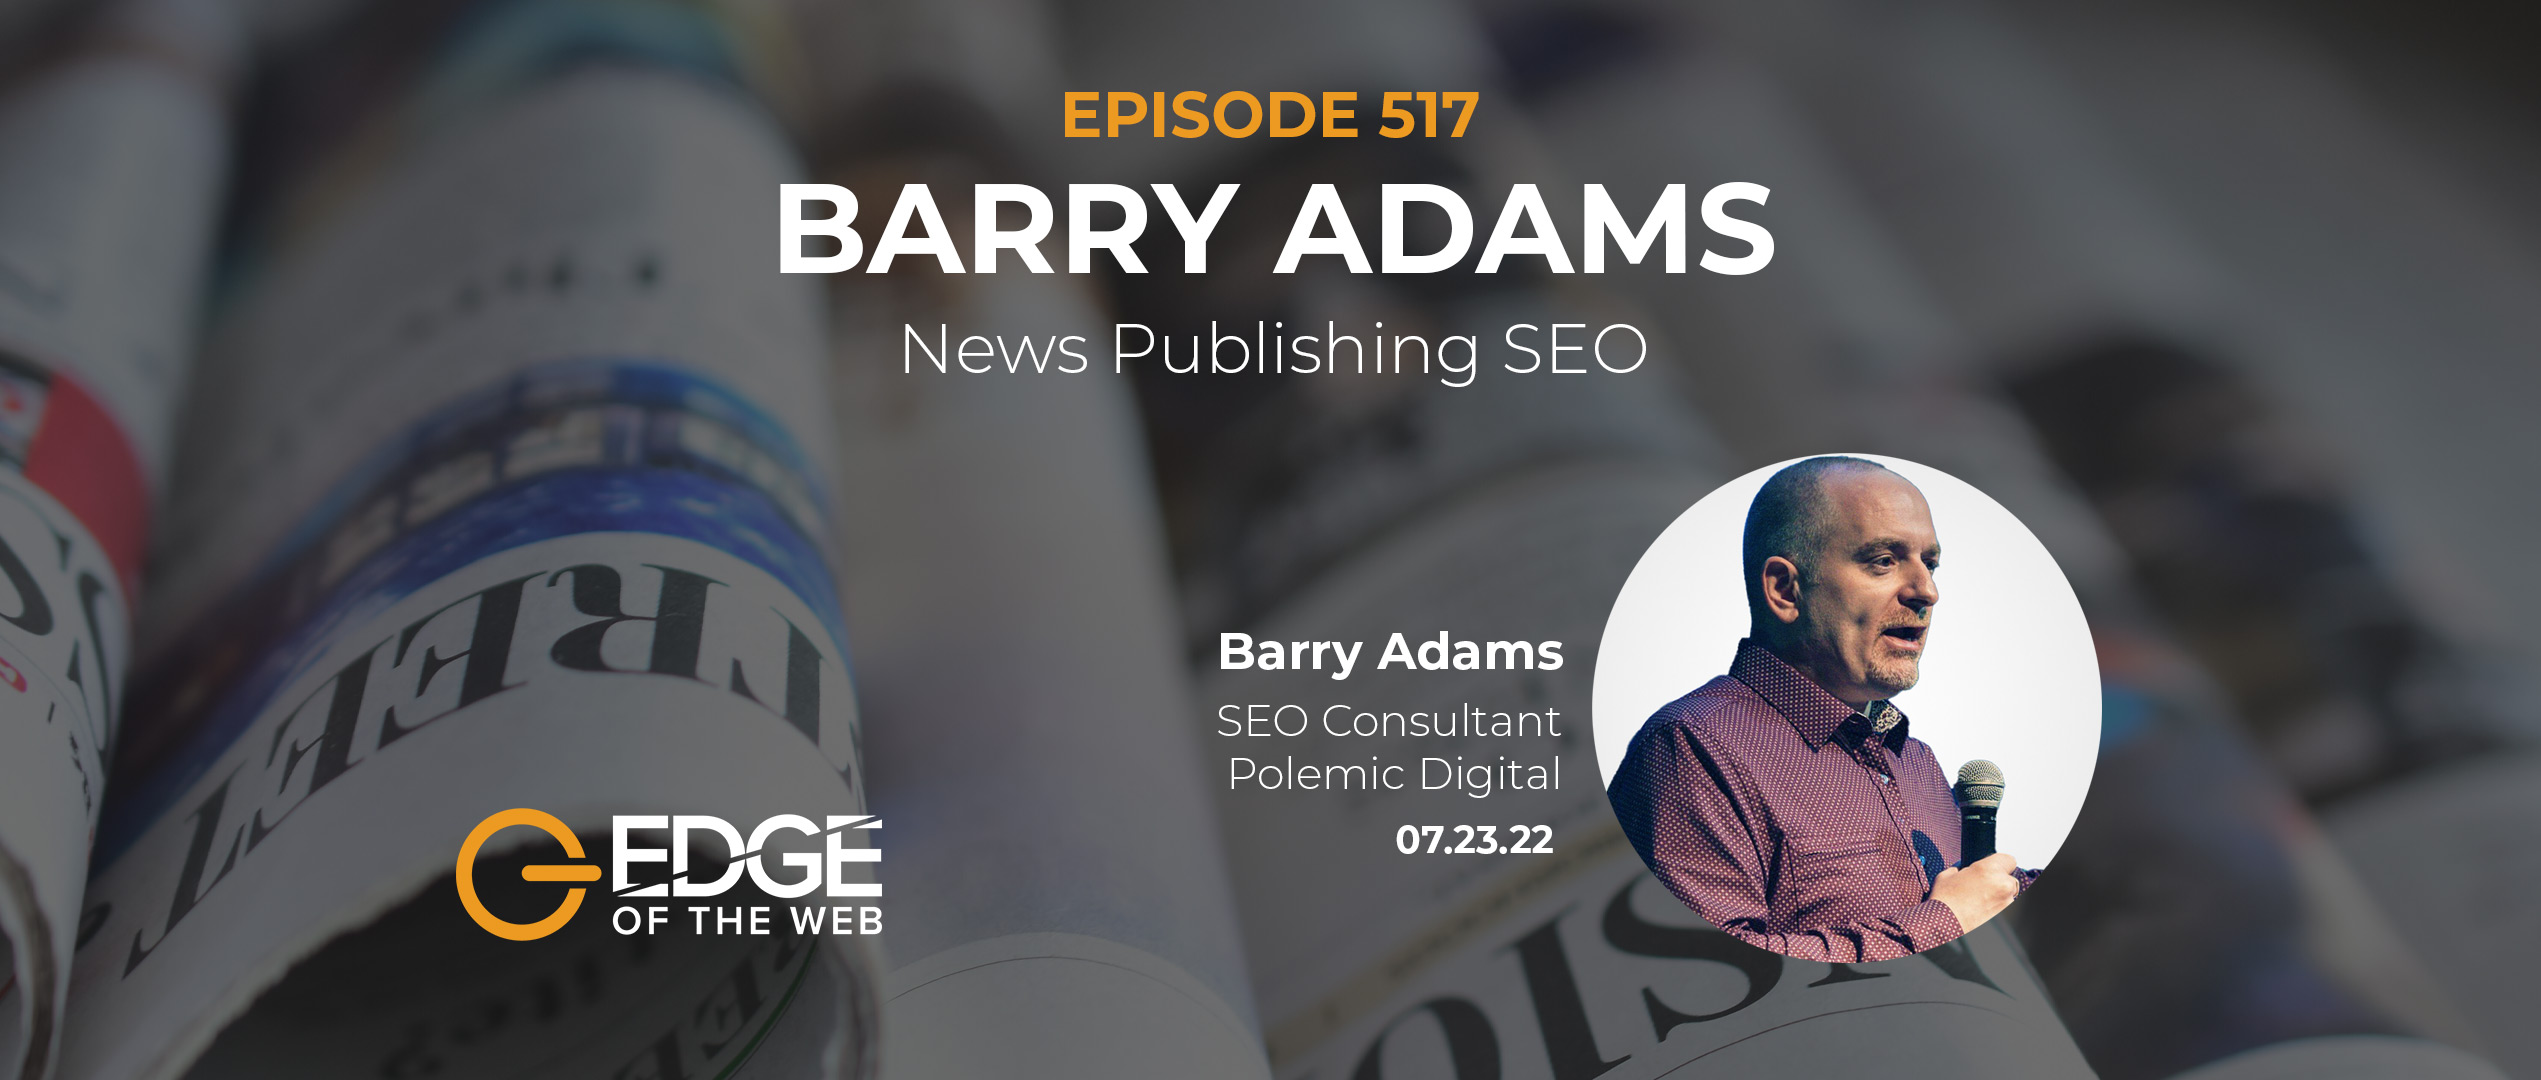 Barry Adams EDGE Episode 517 Featured Image